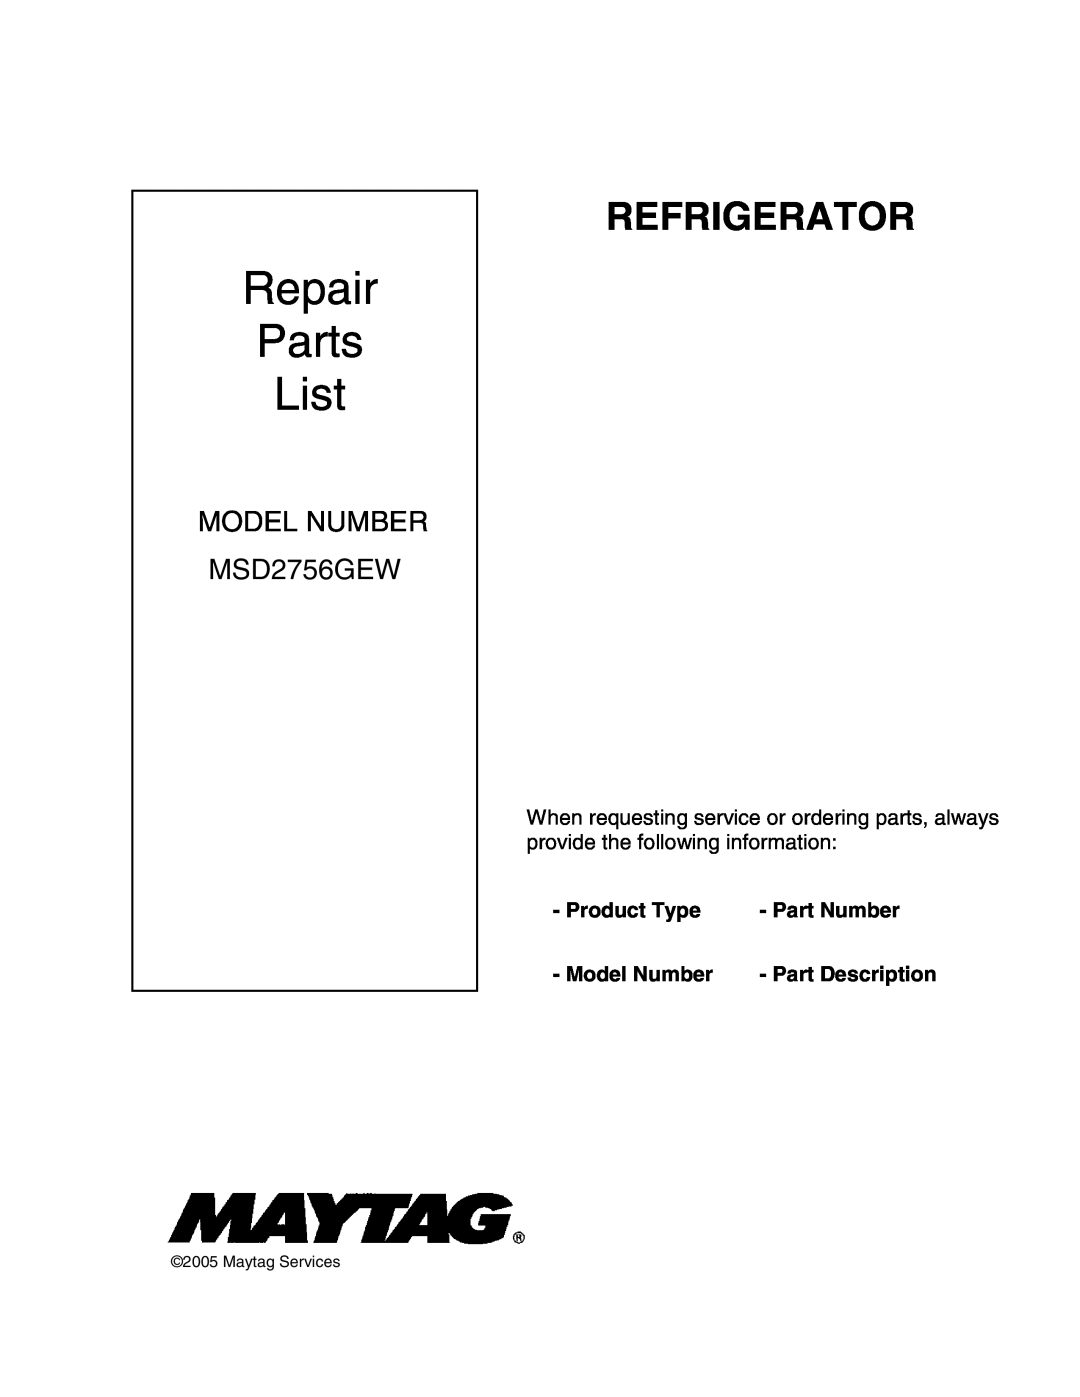 Maytag MSD2756GEW manual Product Type, Part Number, Model Number, Part Description, Repair Parts List, Refrigerator 